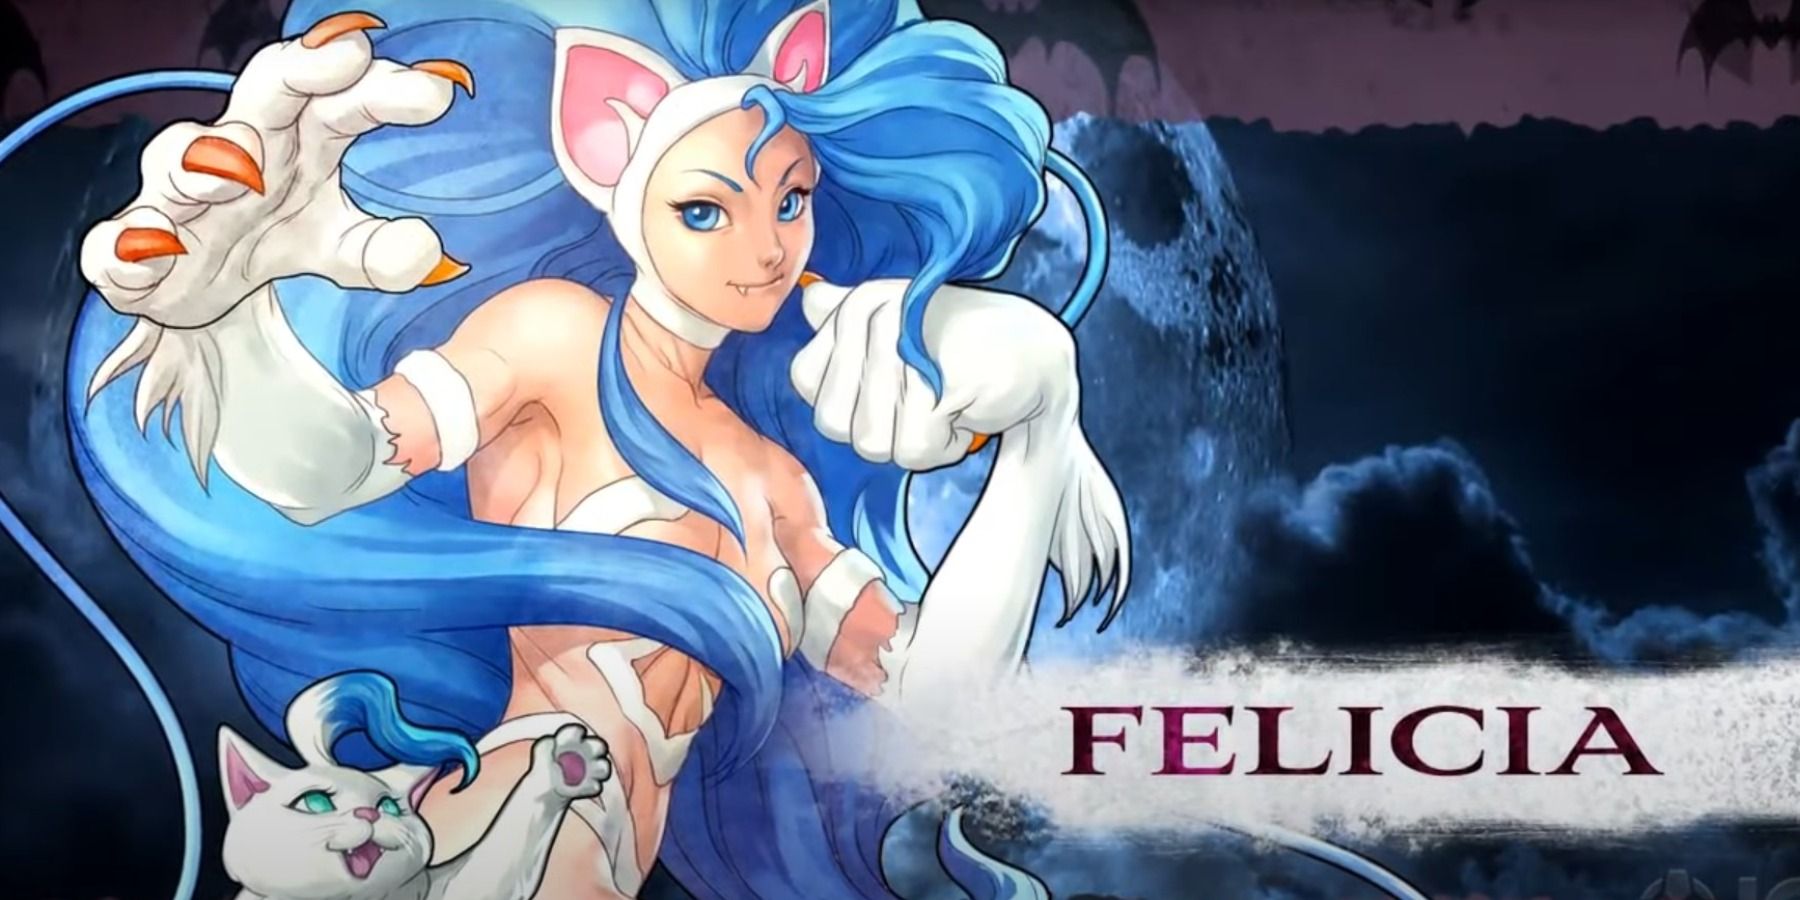 Felicia poses with her name